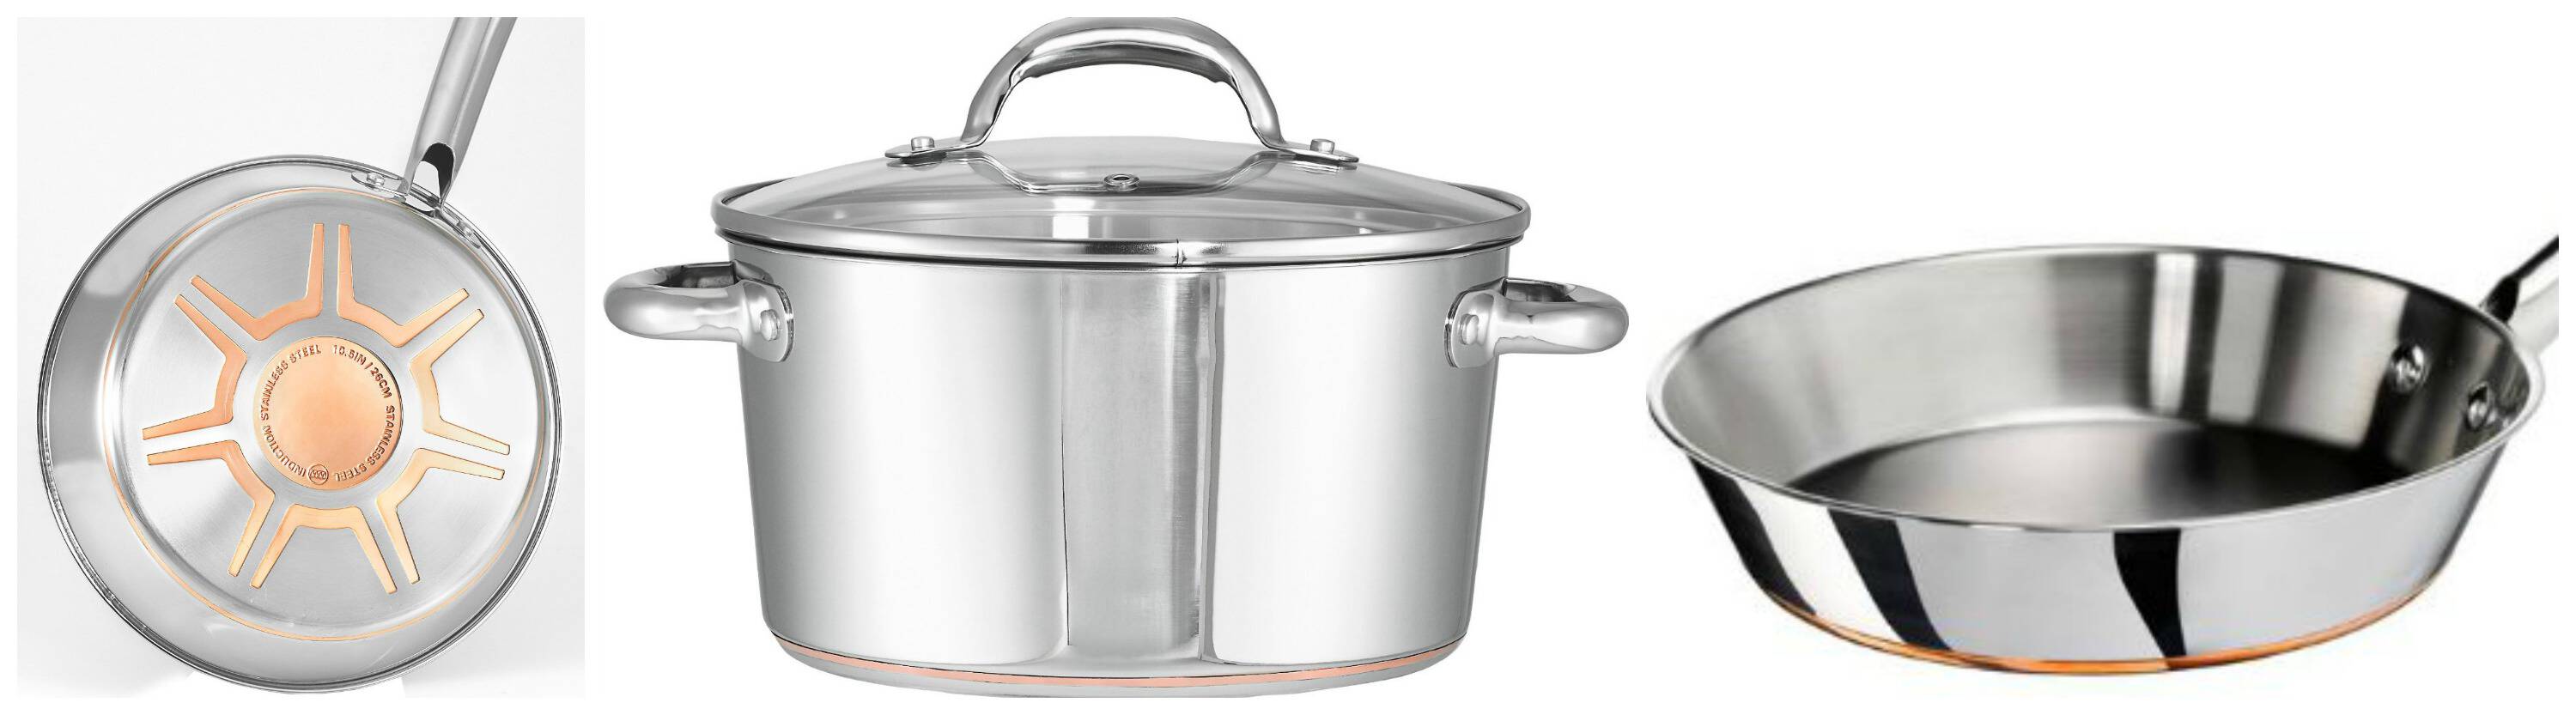 tfal stainless steel cookware